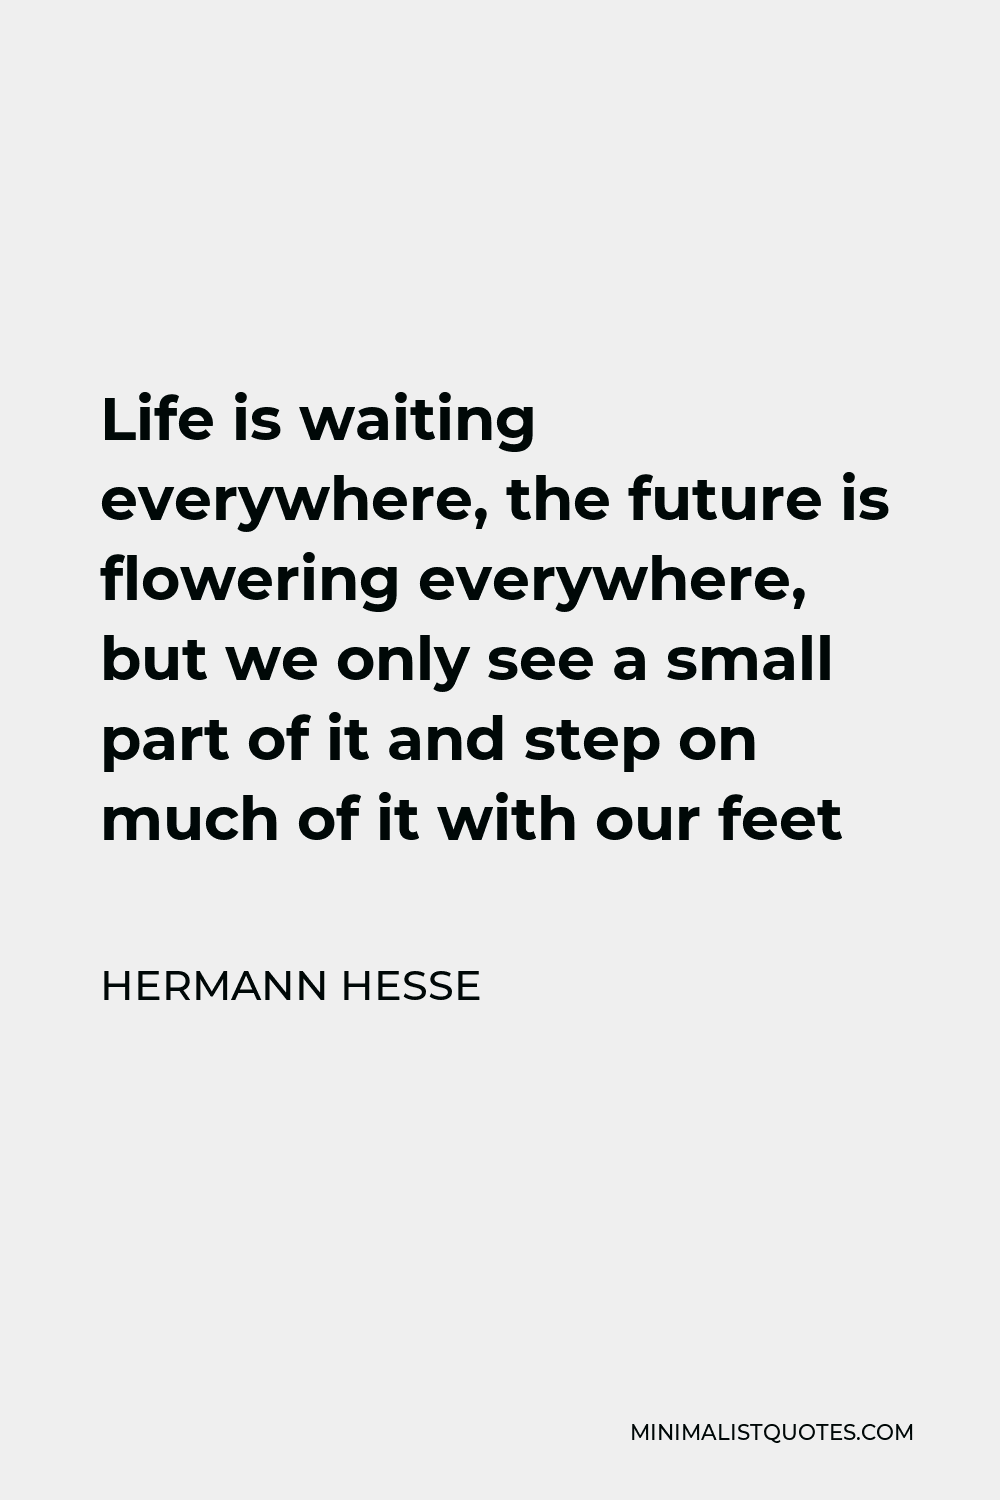 Hermann Hesse Quote - Life is waiting everywhere, the future is flowering everywhere, but we only see a small part of it and step on much of it with our feet